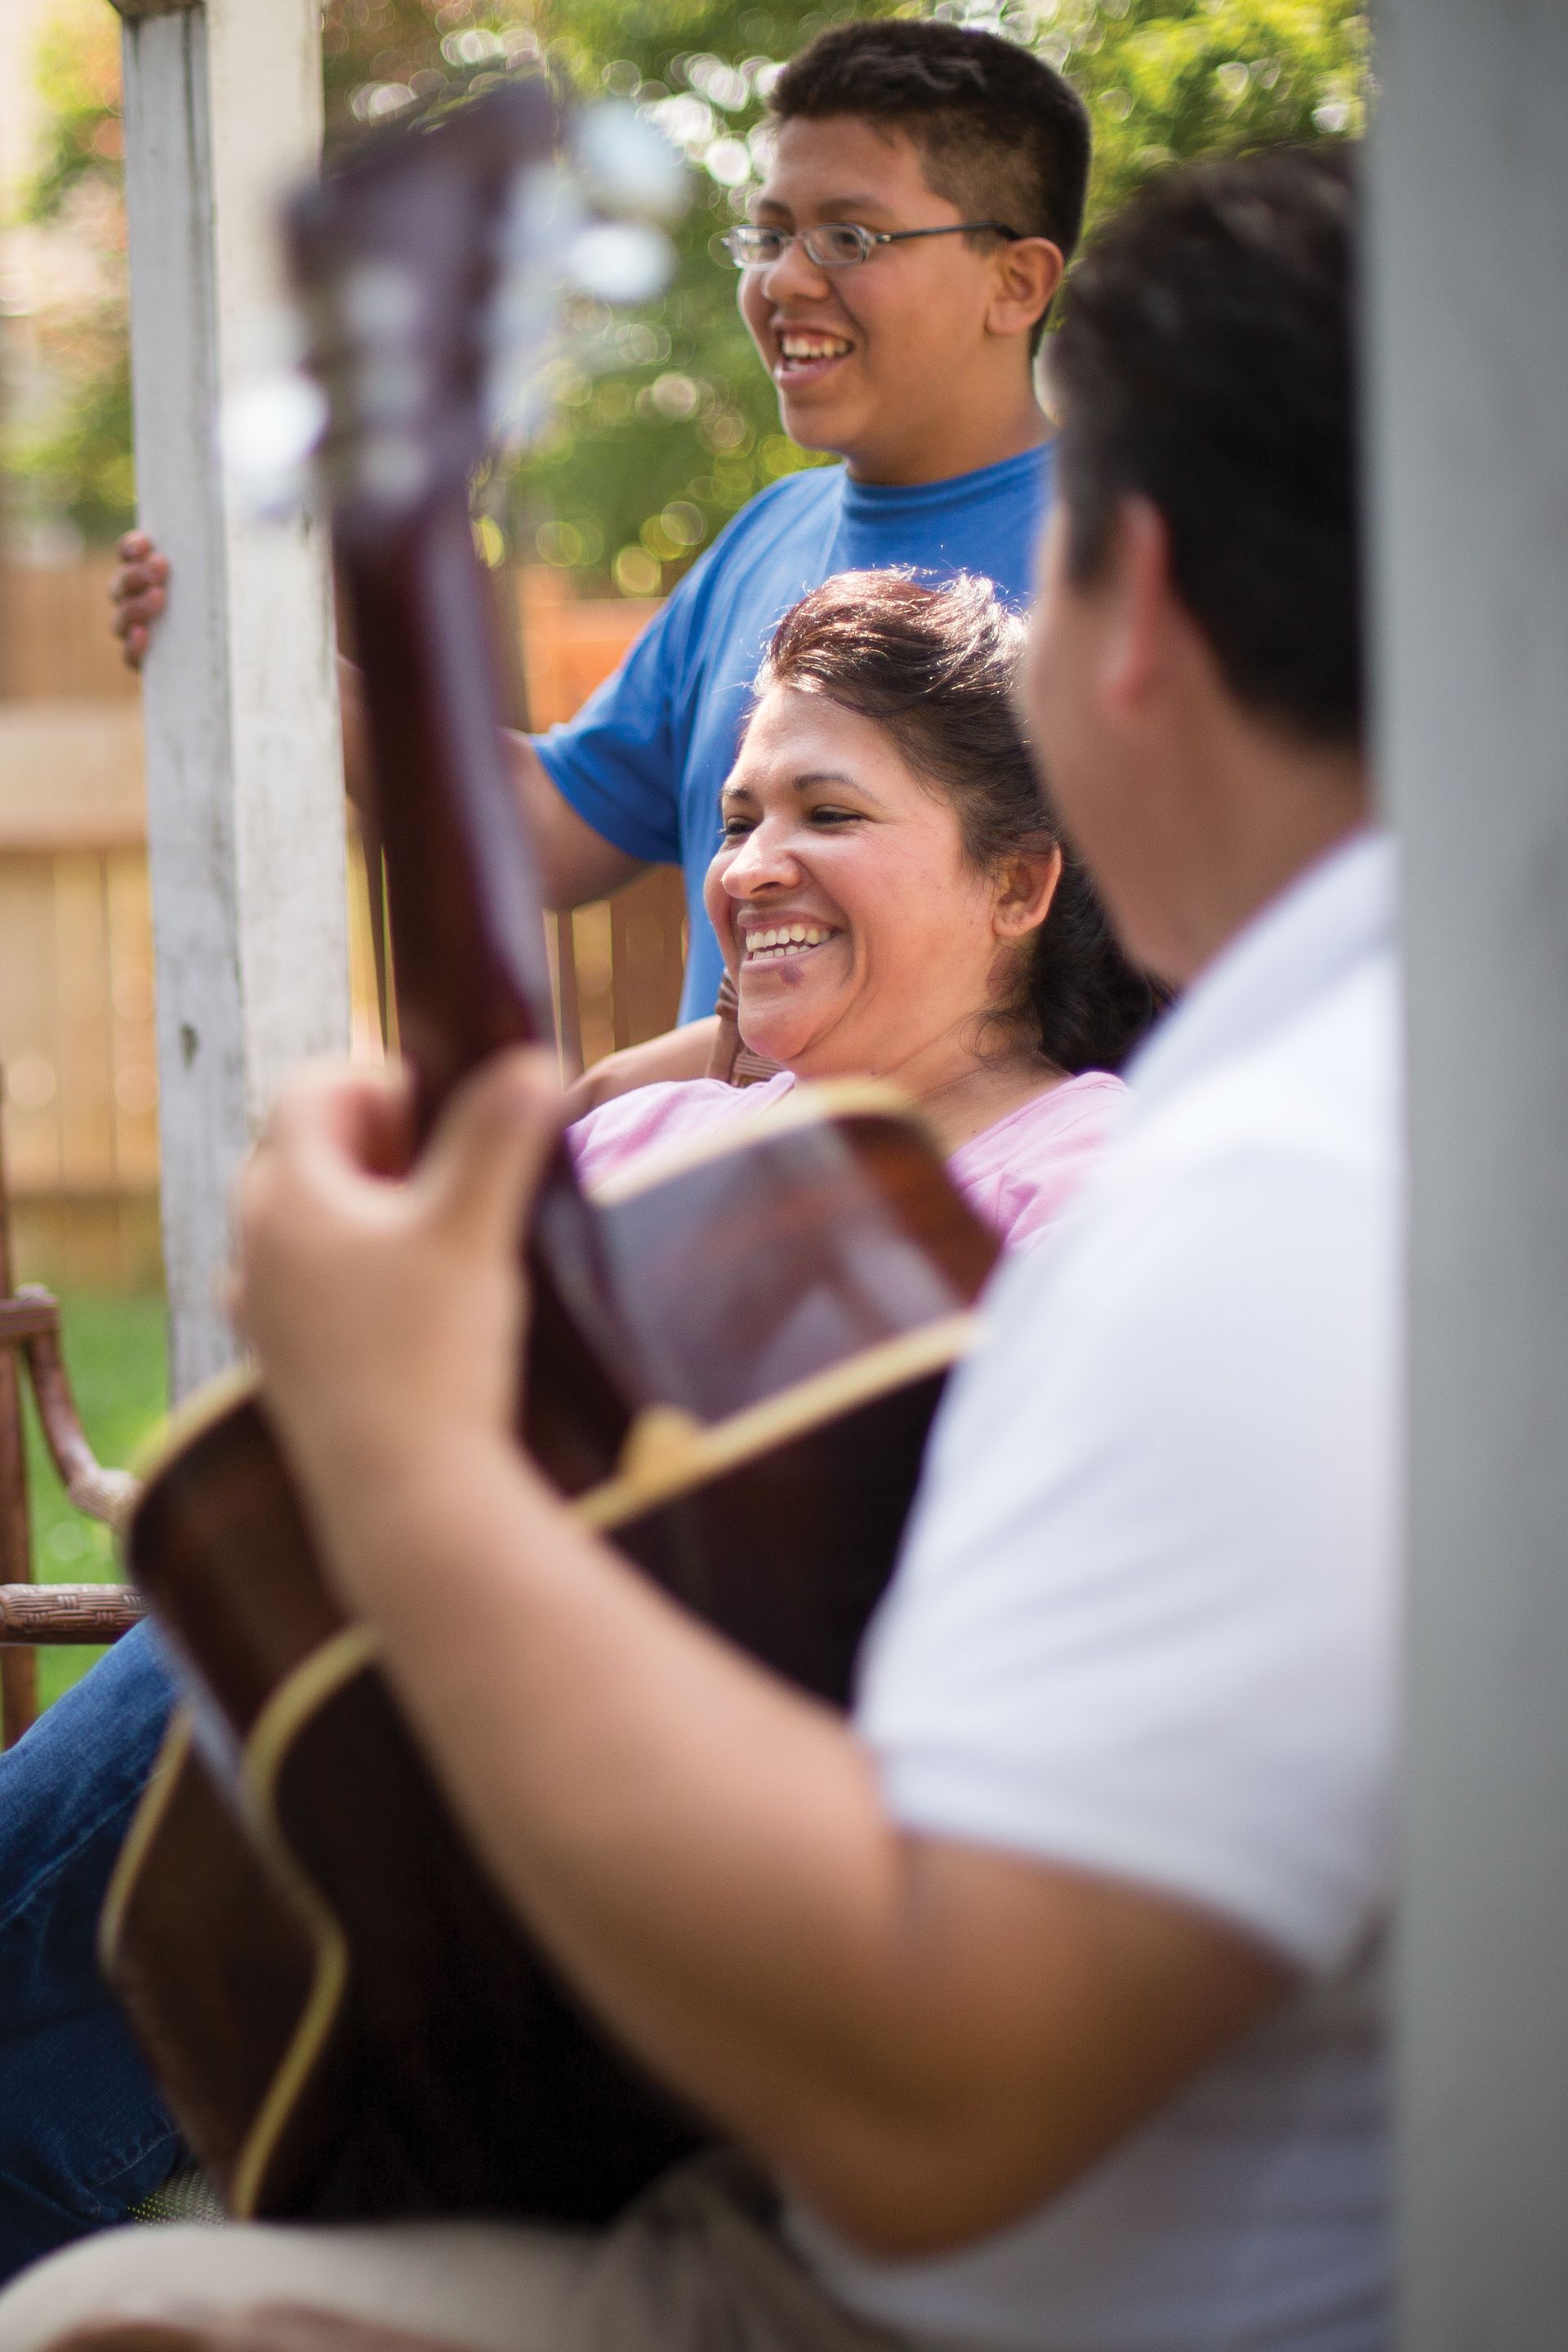 A young man plays the guitar while his family sings.